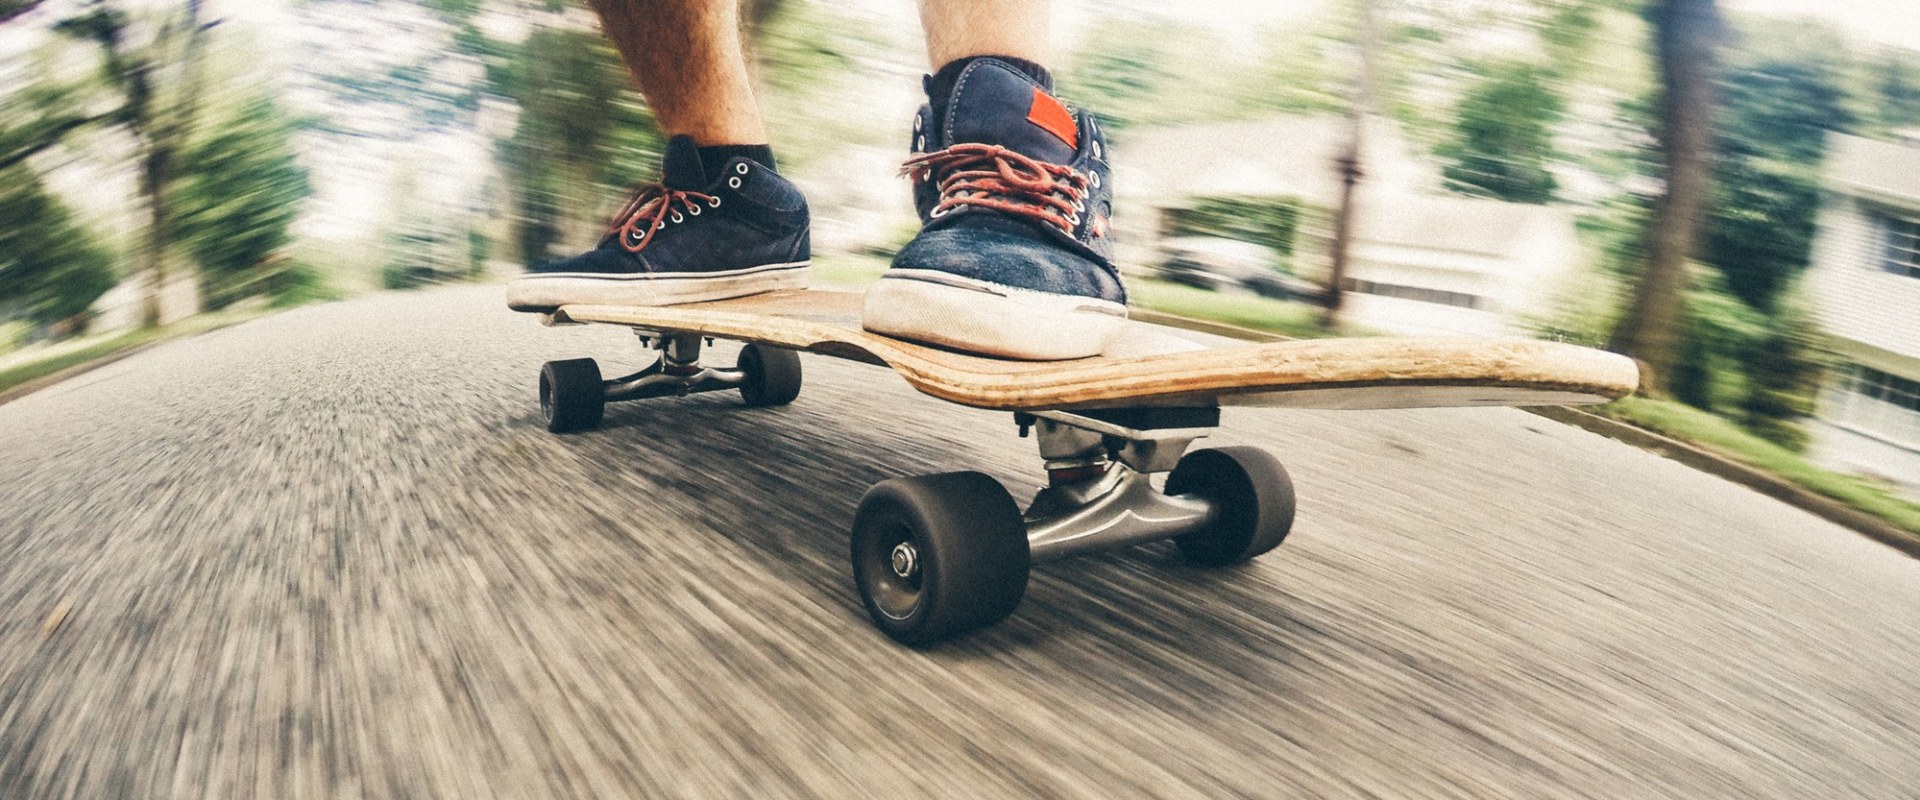 Downhill Longboards: Everything You Need to Know